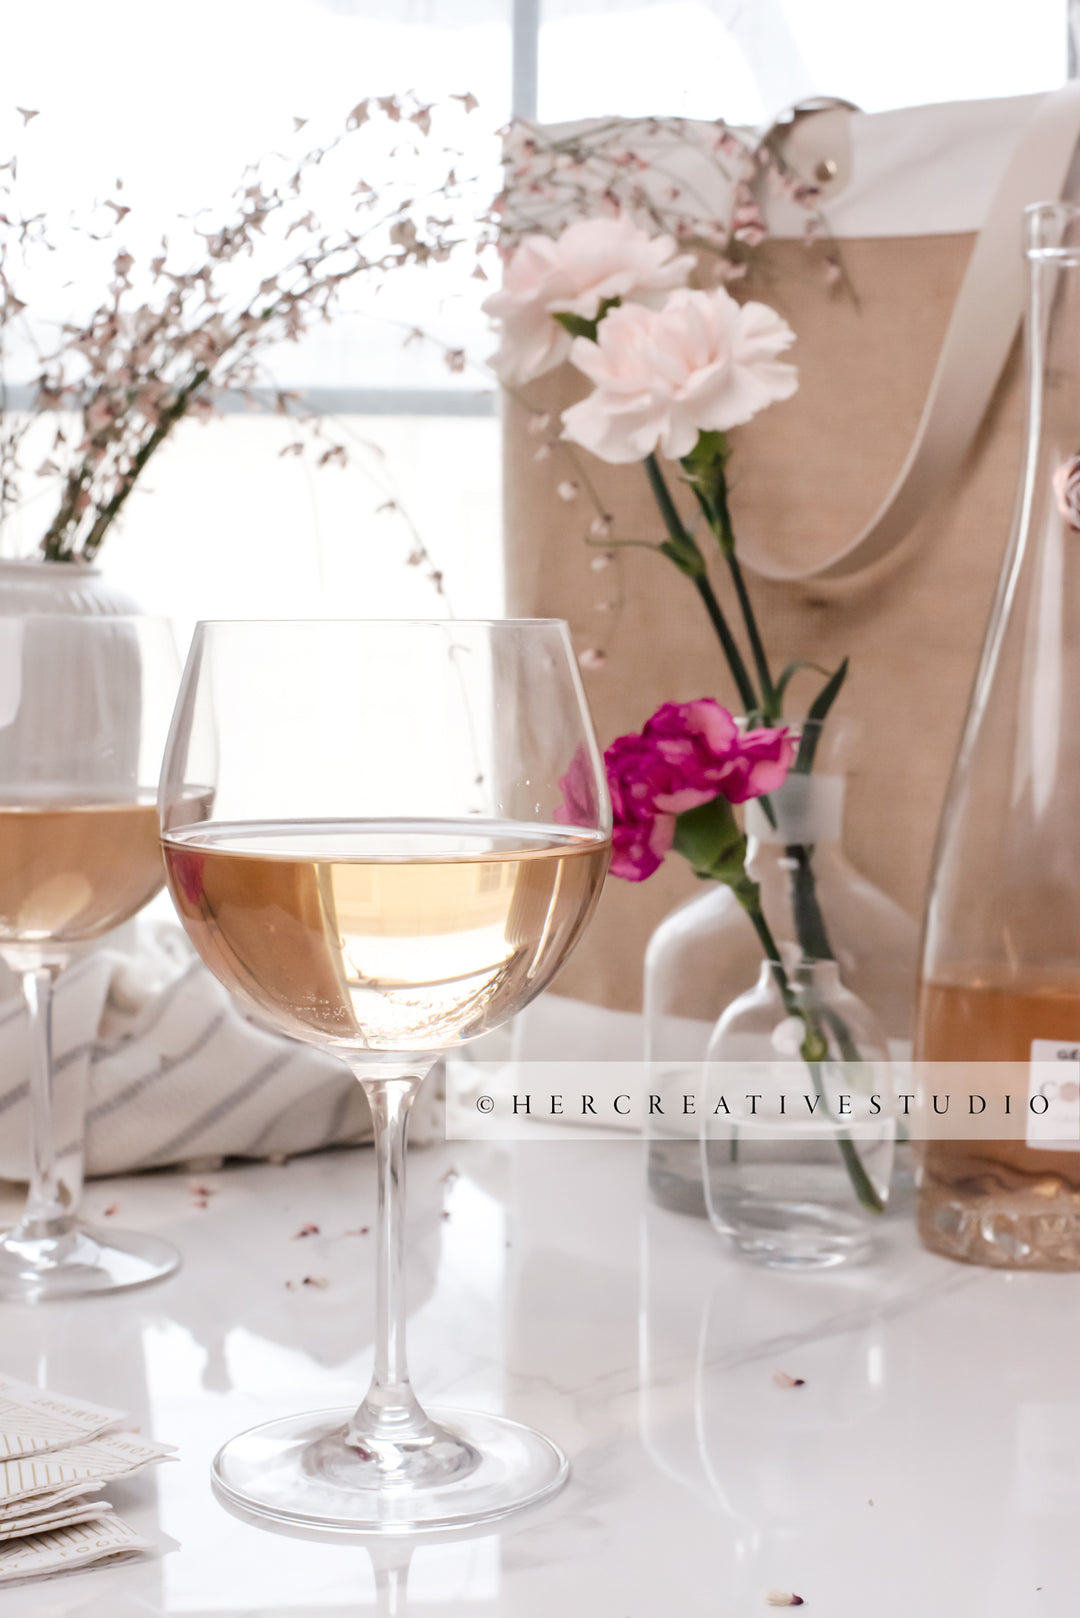 Glasses of Wine and Carnations, Styled Image